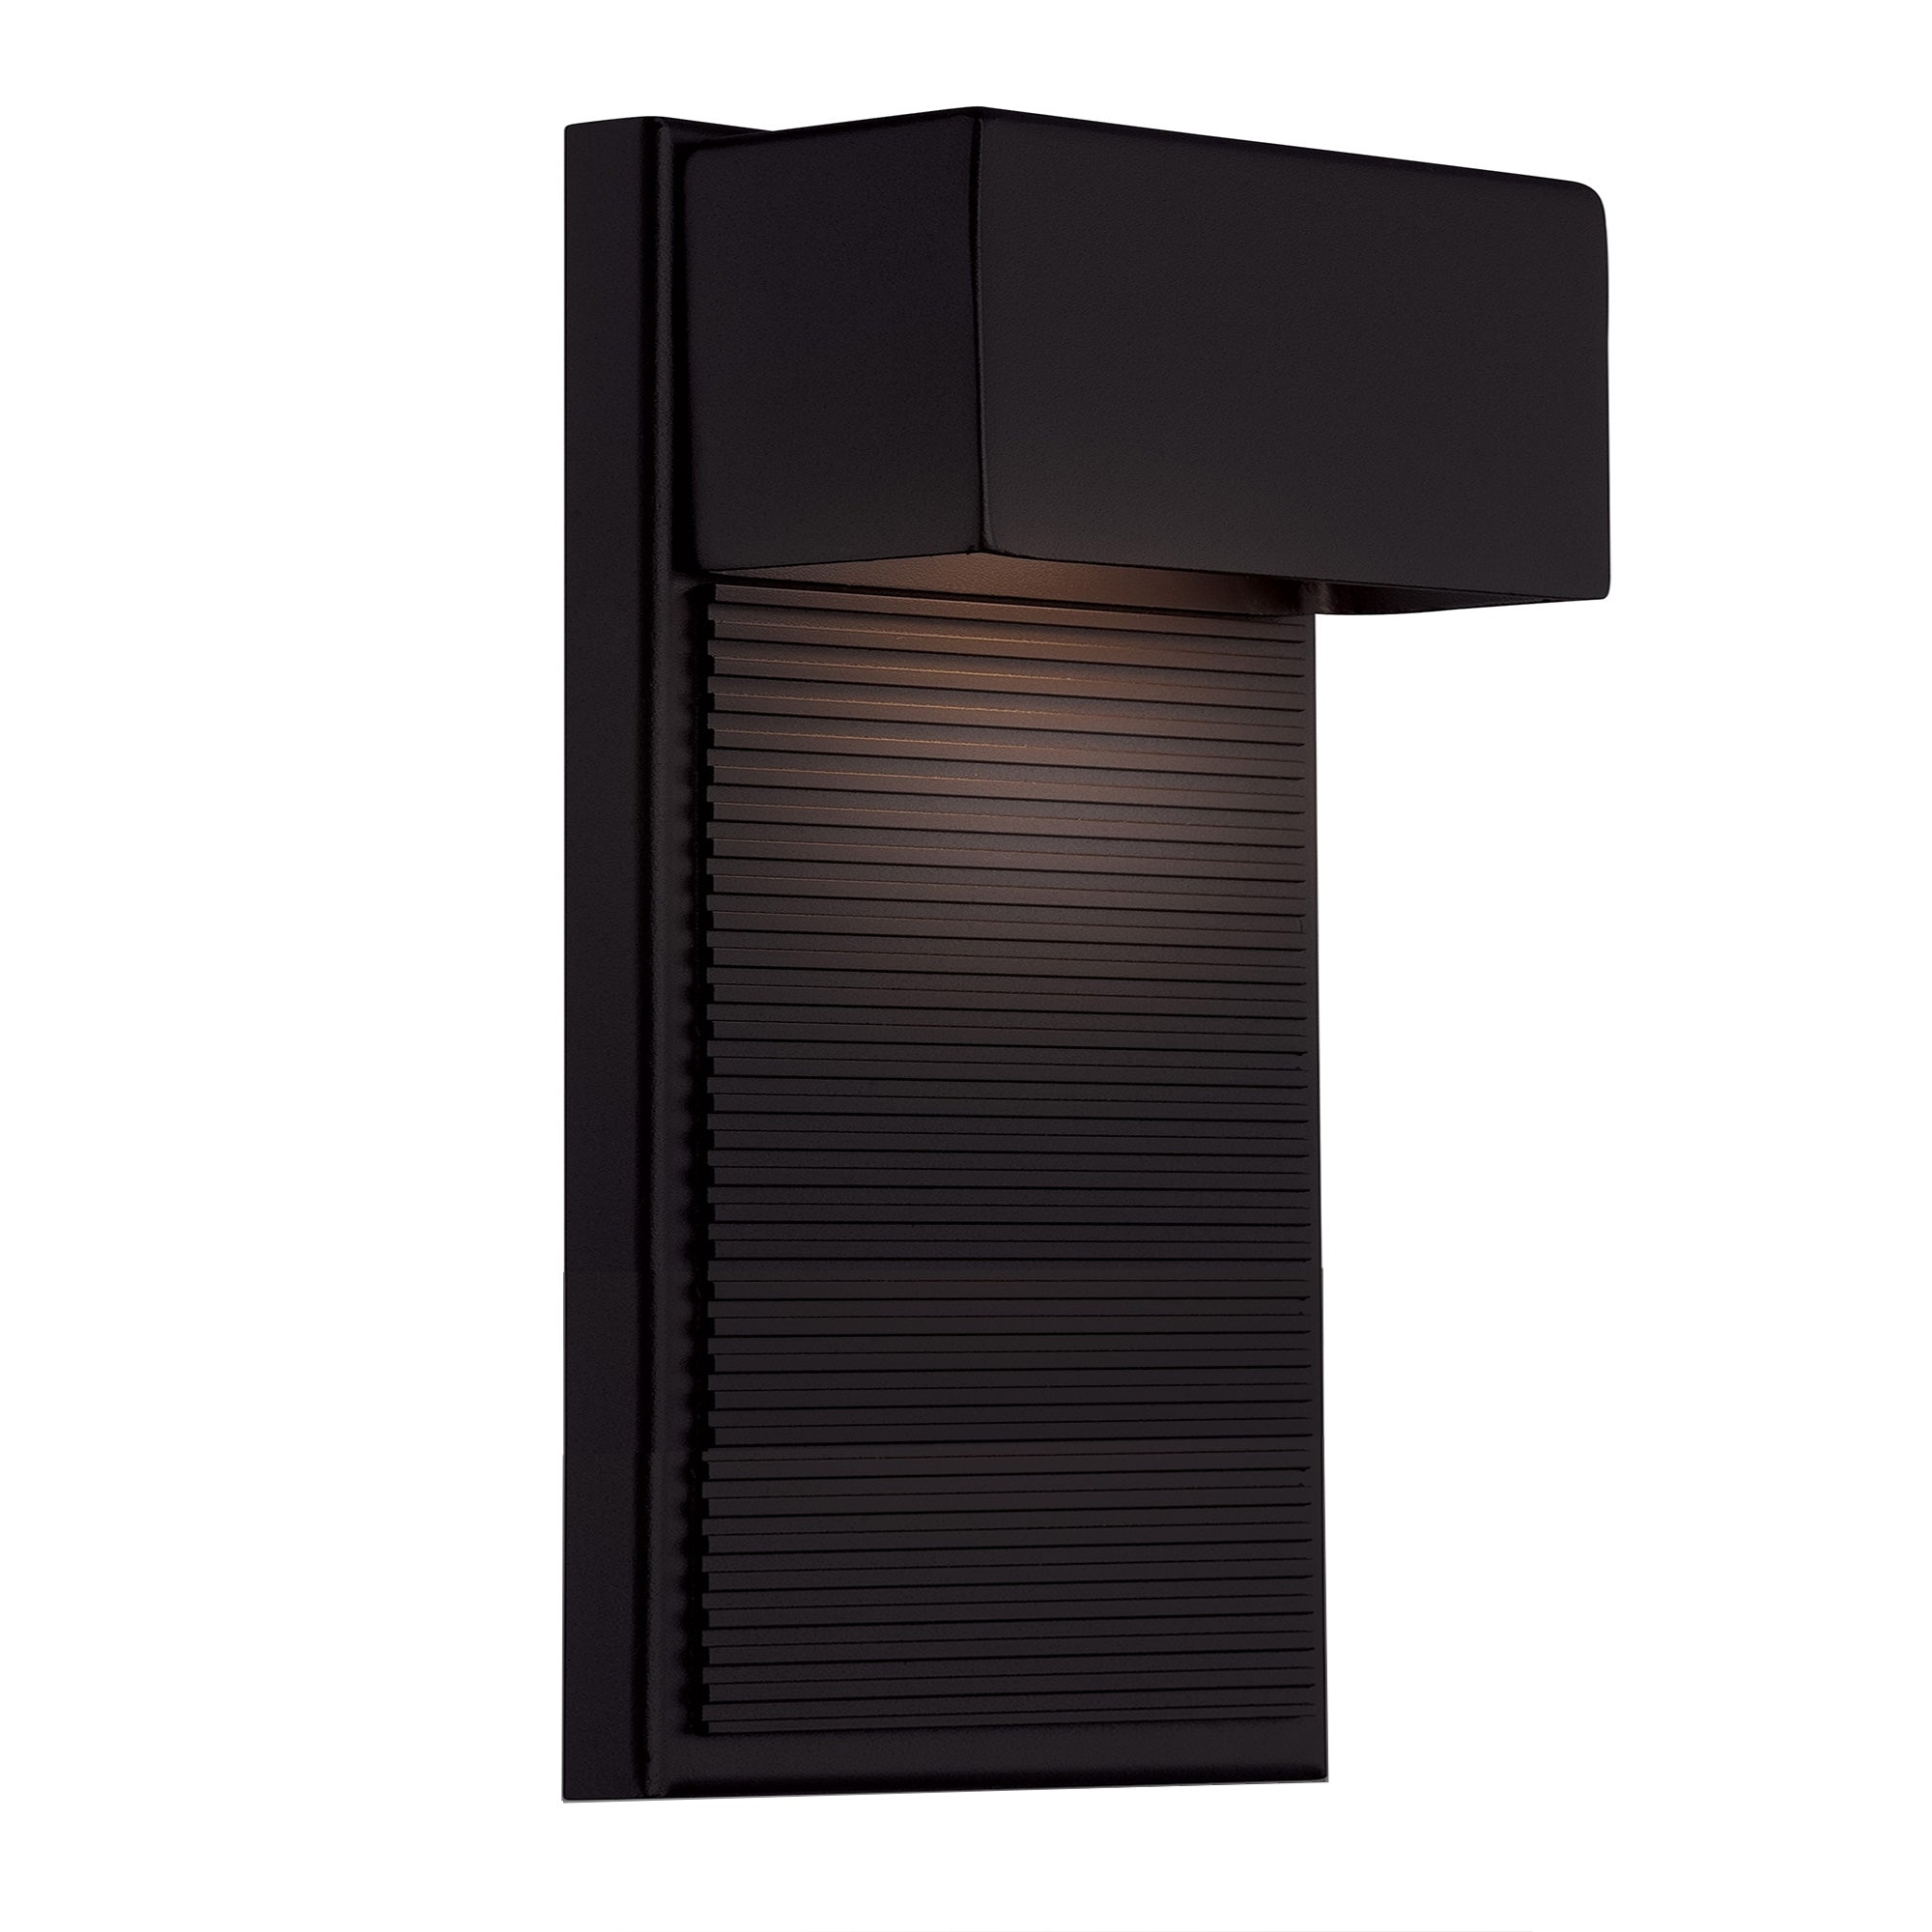 Hiline 12" LED Indoor/Outdoor Wall Light